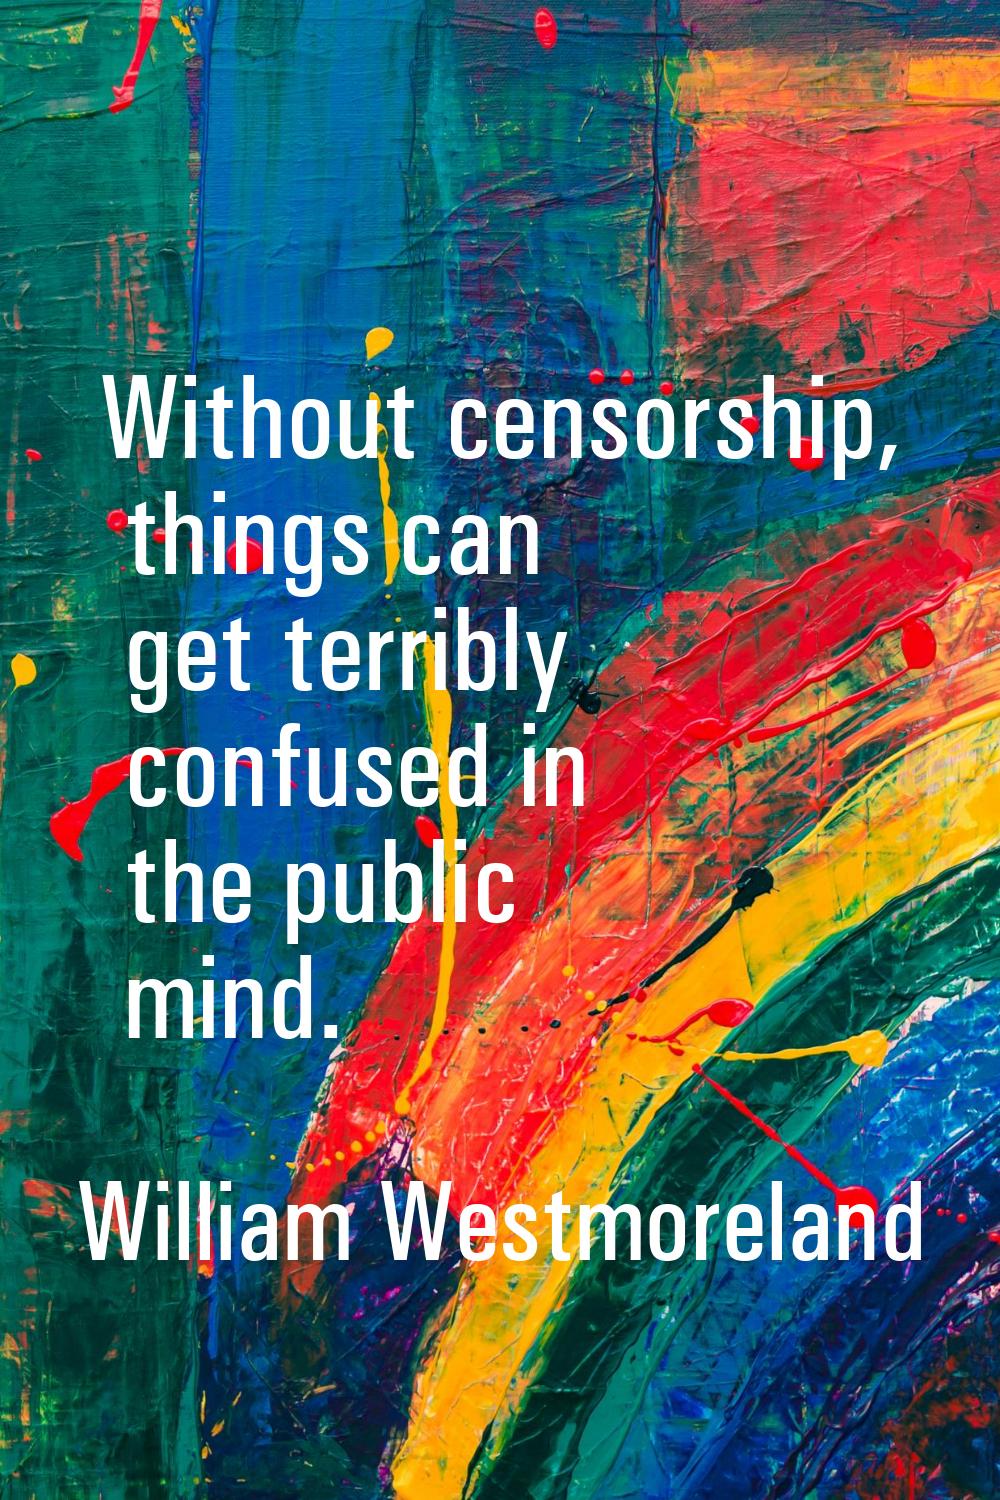 Without censorship, things can get terribly confused in the public mind.